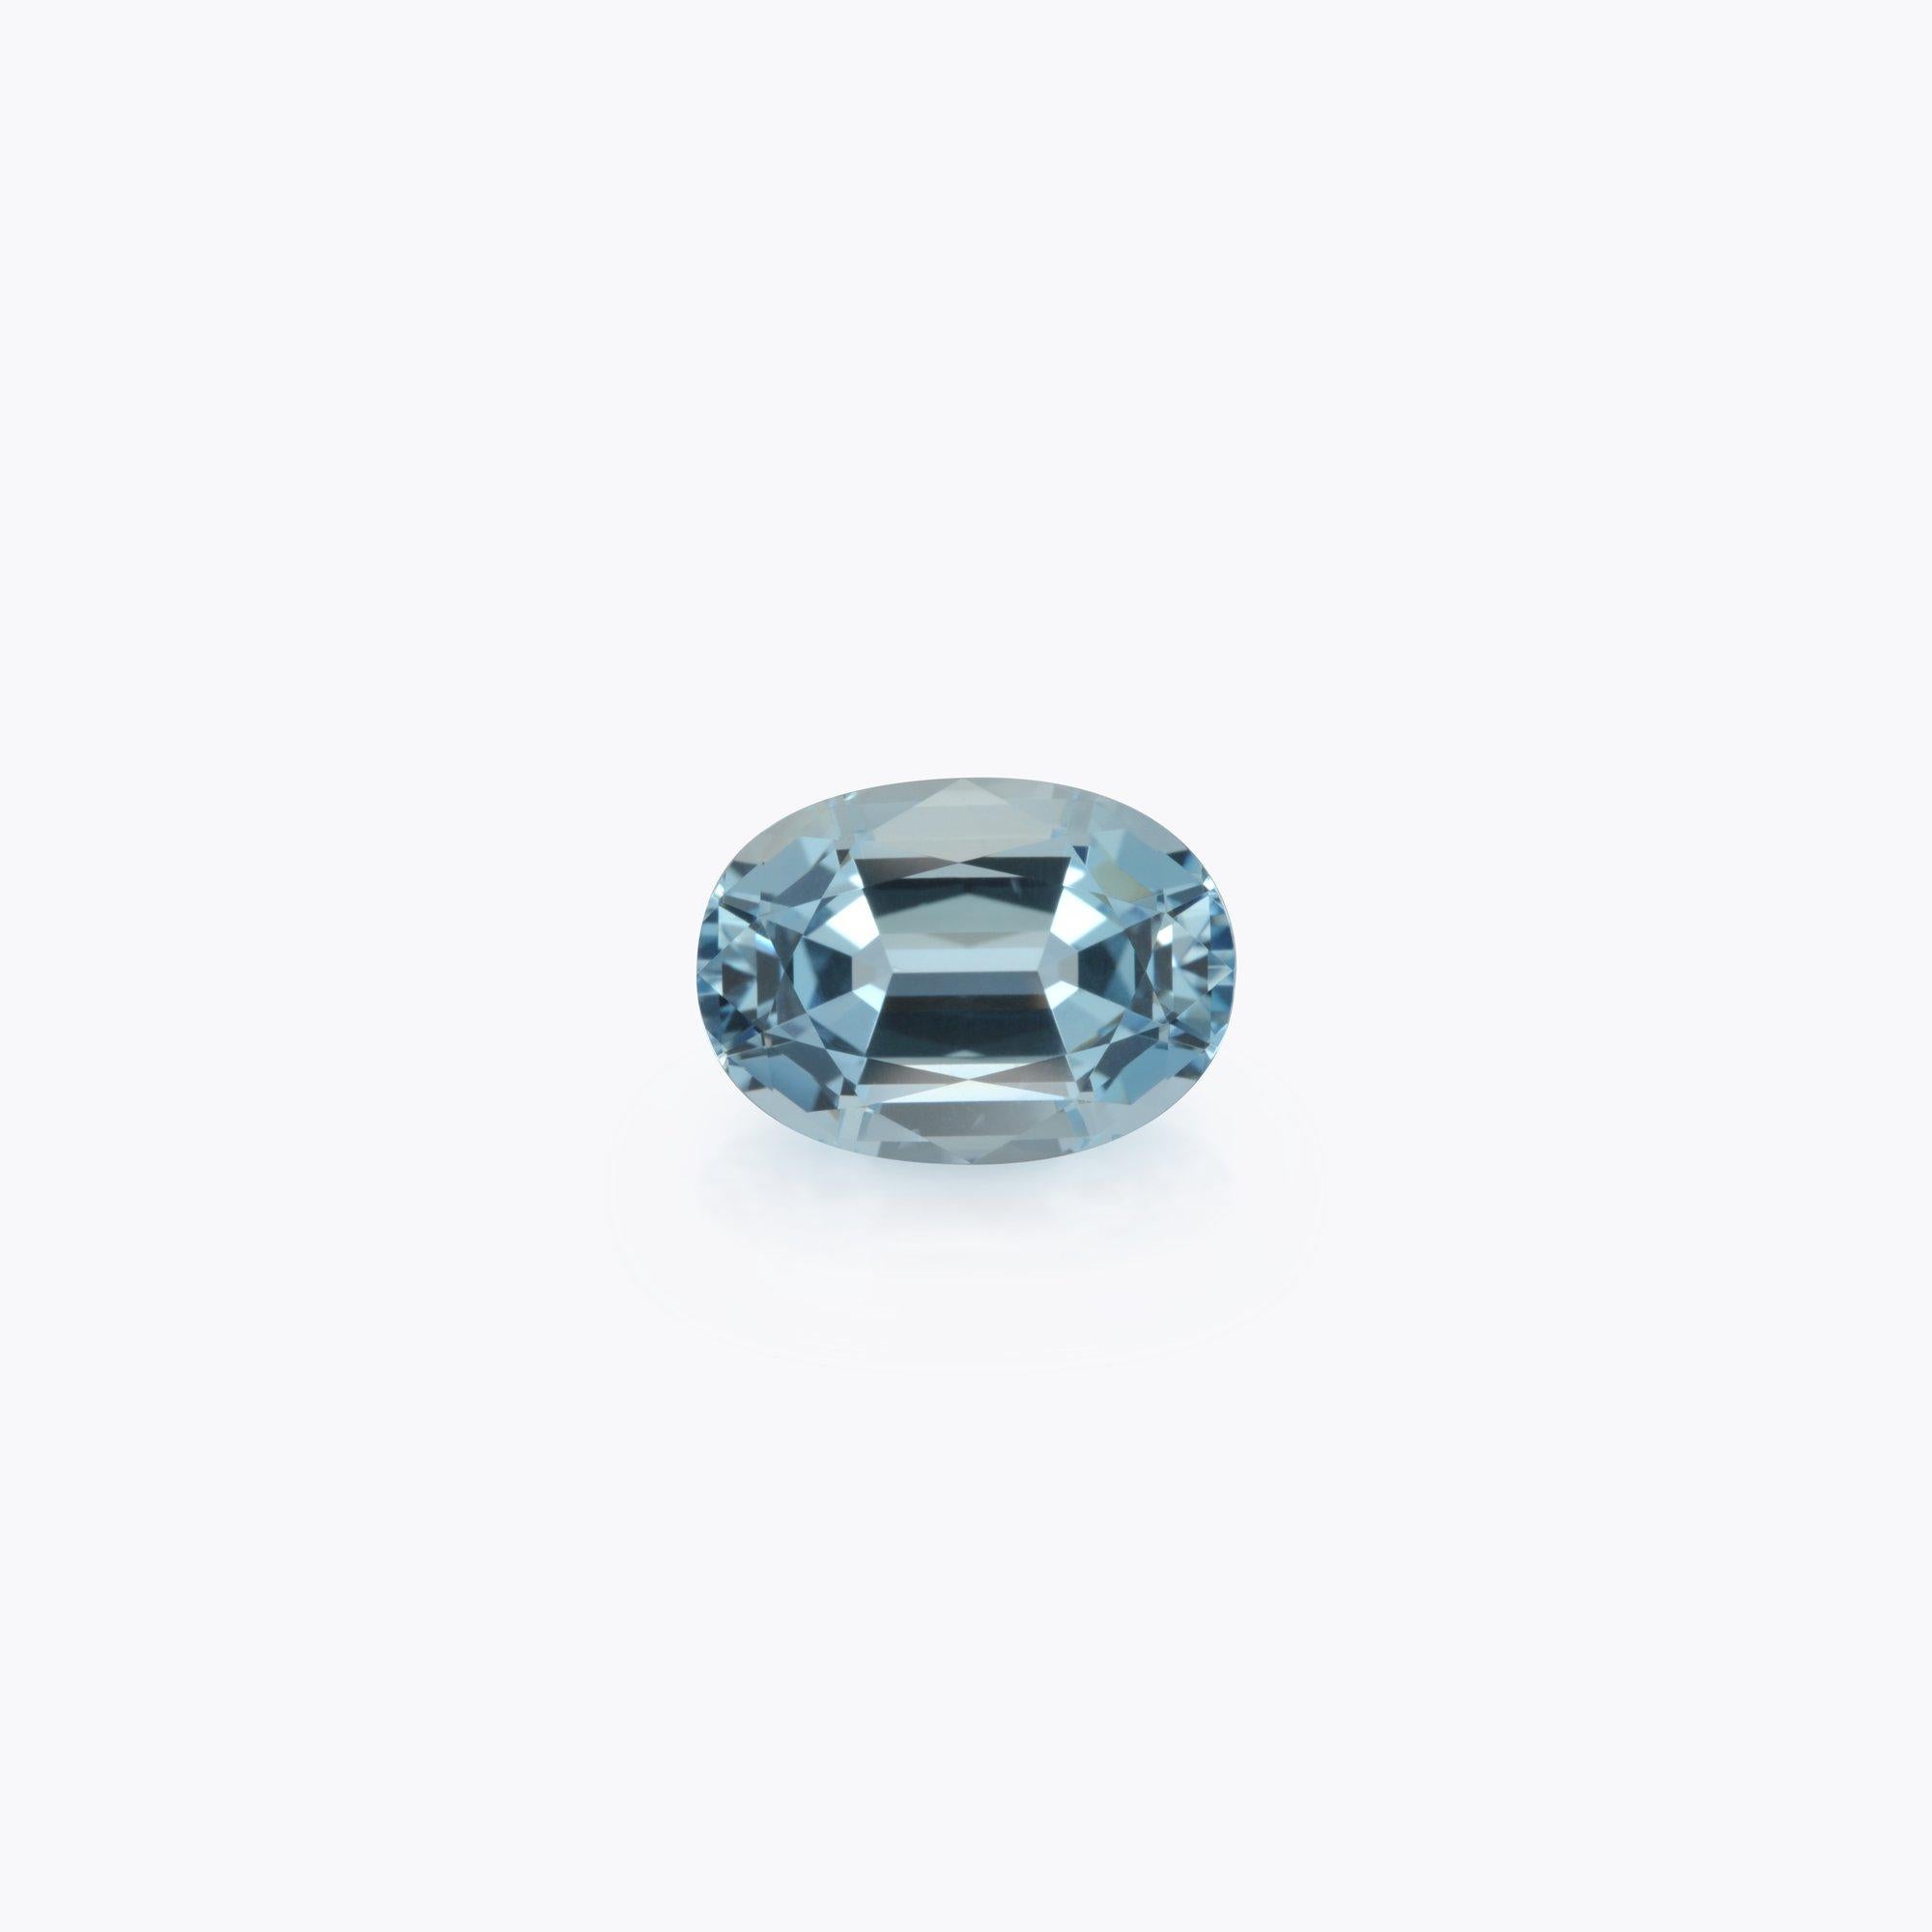 Exquisite 5 carat Brazilian Aquamarine gem offered loose to a classy lady or gentleman.
This gem displays exceptional crystal and sharp brilliance.
Returns are accepted and paid by us within 7 days of delivery.
We offer supreme custom jewelry work